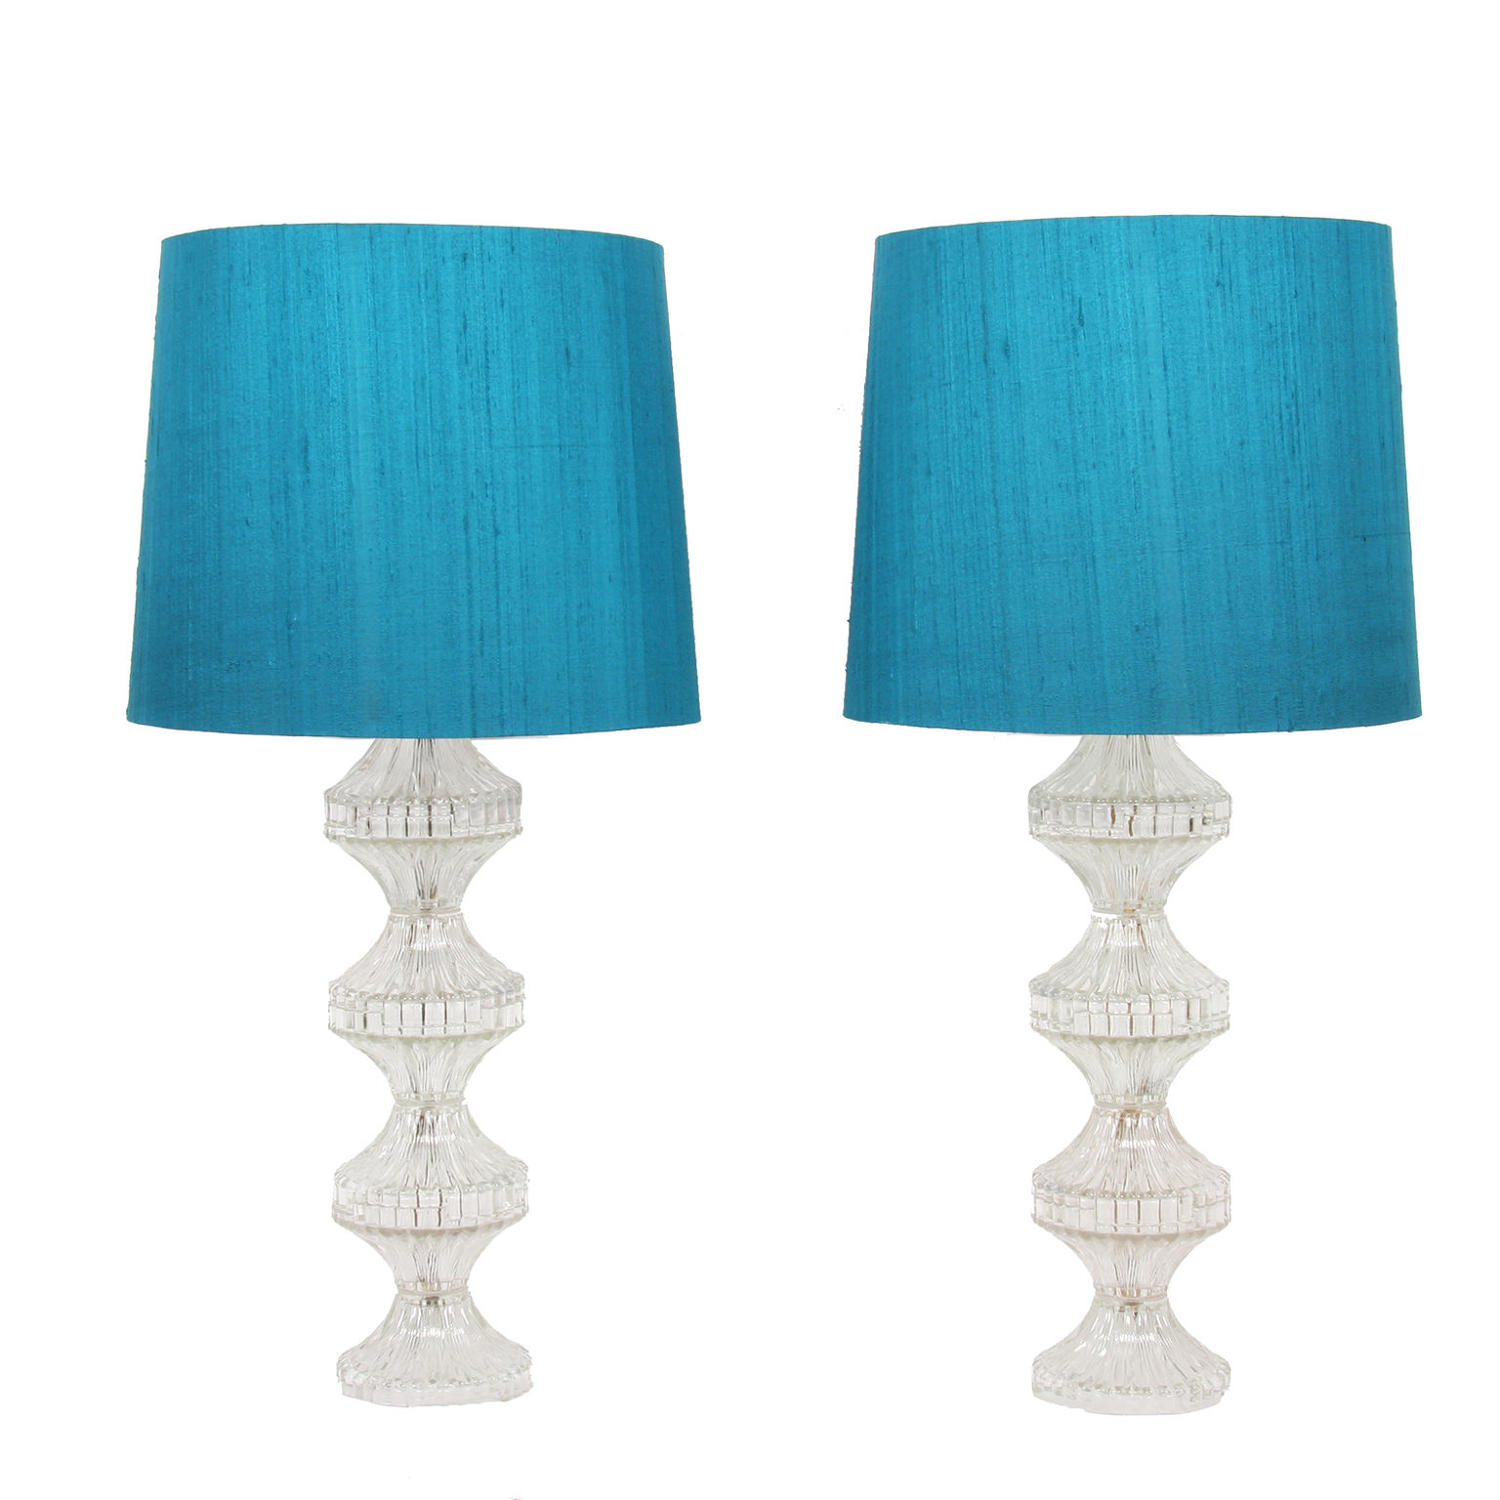 Pair of Large Glass Table Lamps